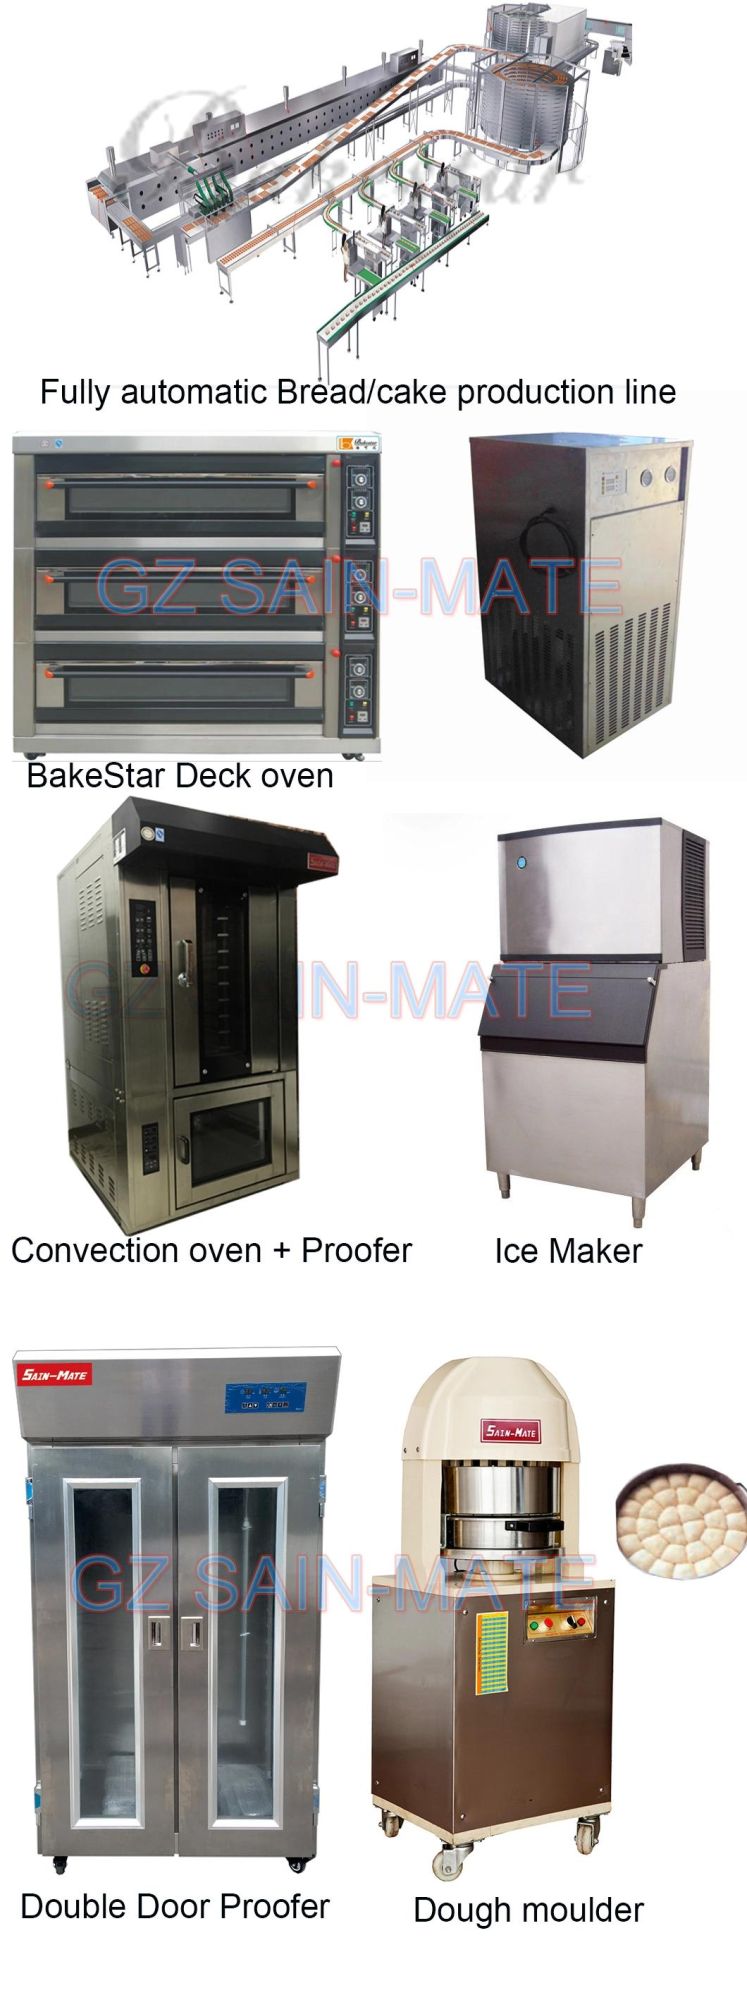 32 16 12 Trays Rotary Oven for Bakery, 12 Tray Rotary Oven for Sale Philippines